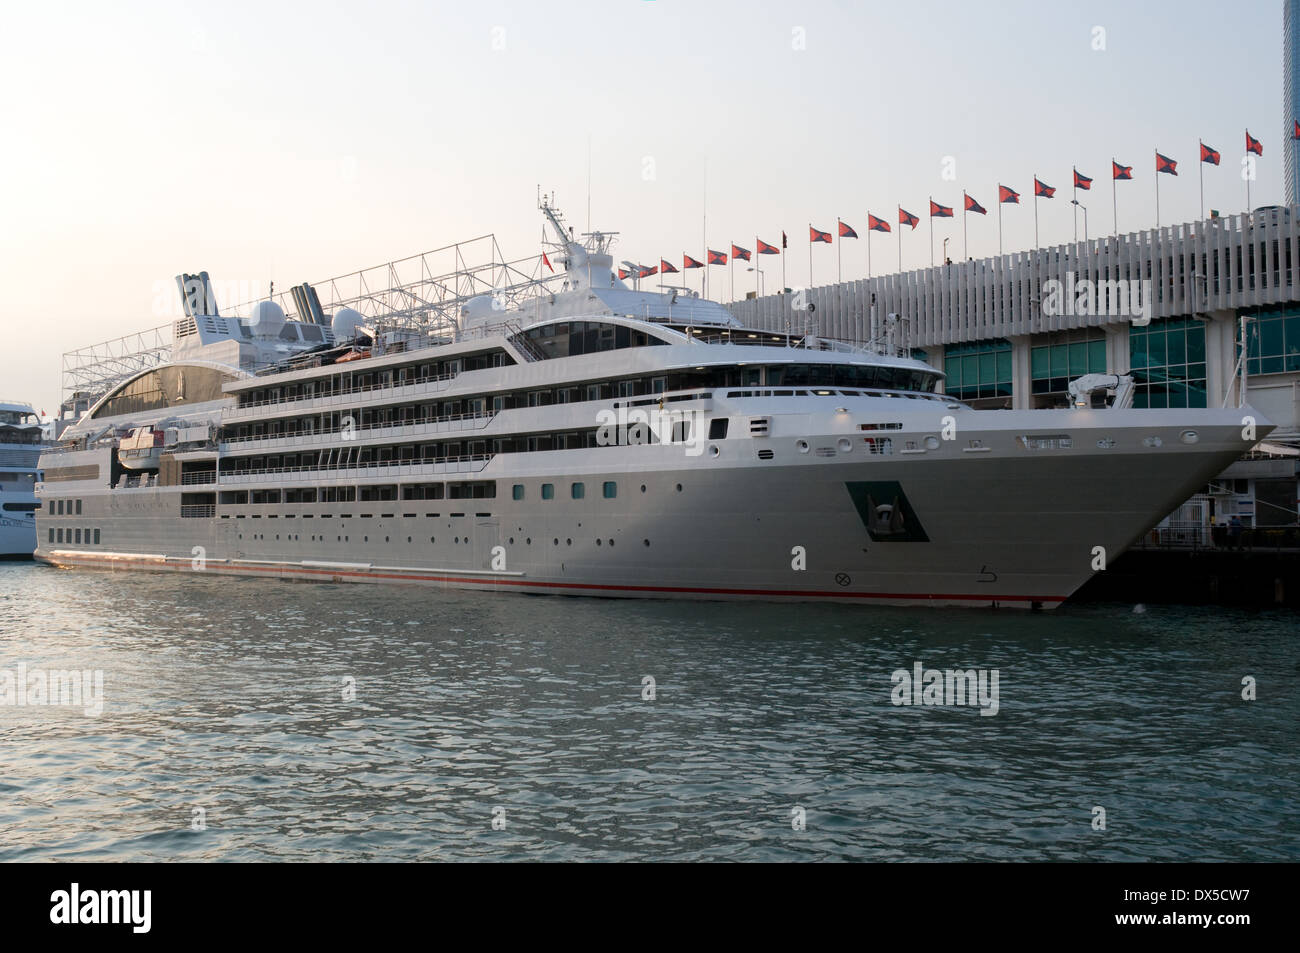 The cruise ship Le Soleal was launched in 2012 and her maiden voyage started in July 2013. It is seen moored in Hong Kong Stock Photo